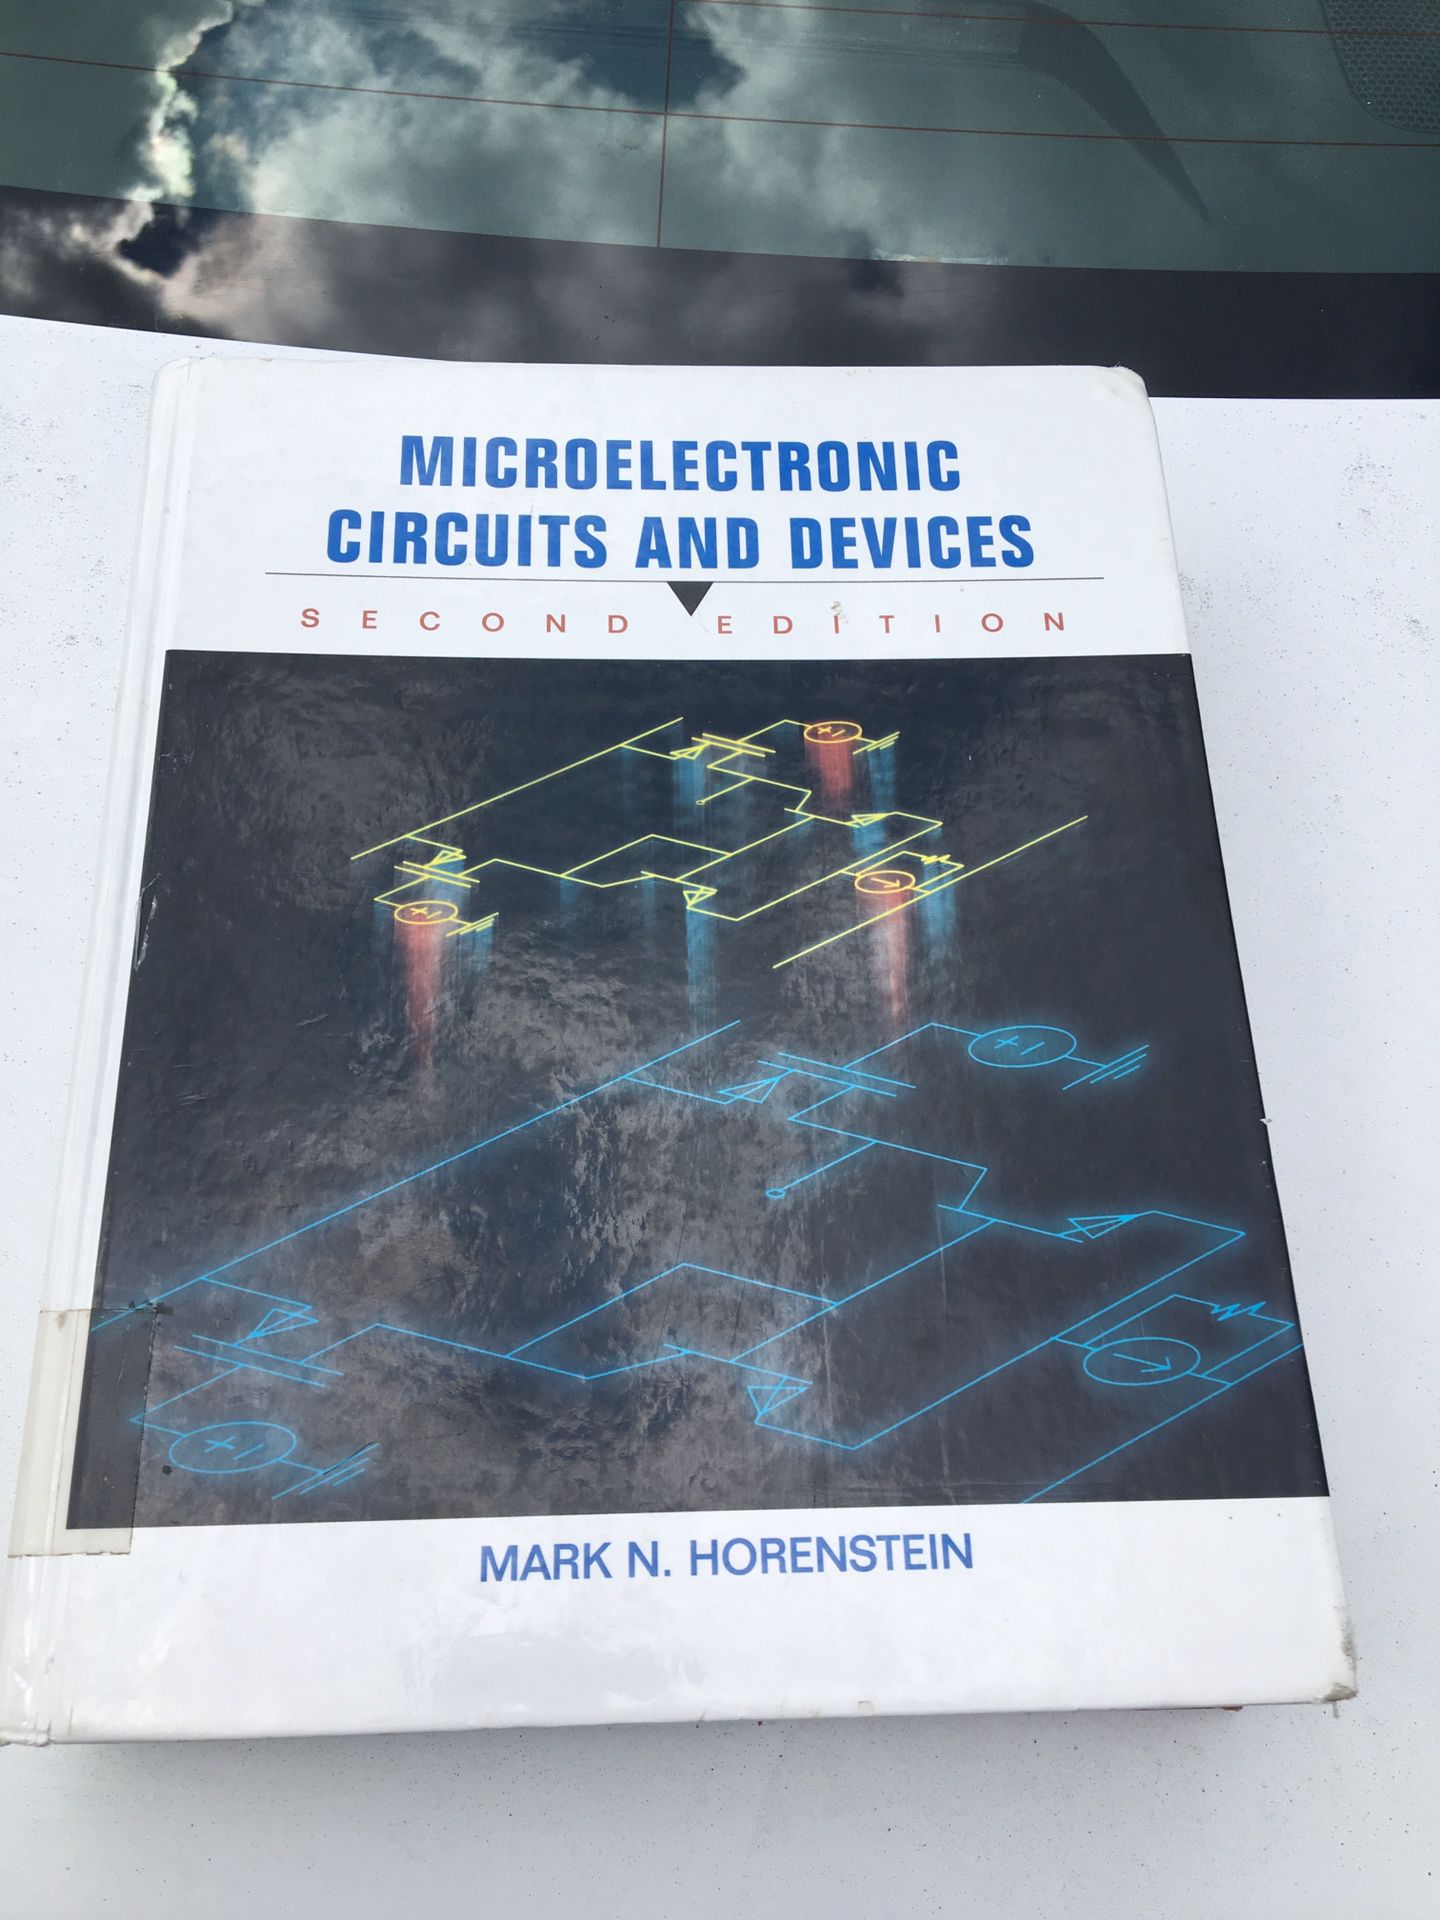 Microelectronic Circuits and Devices (Horenstein) (2nd Ed)